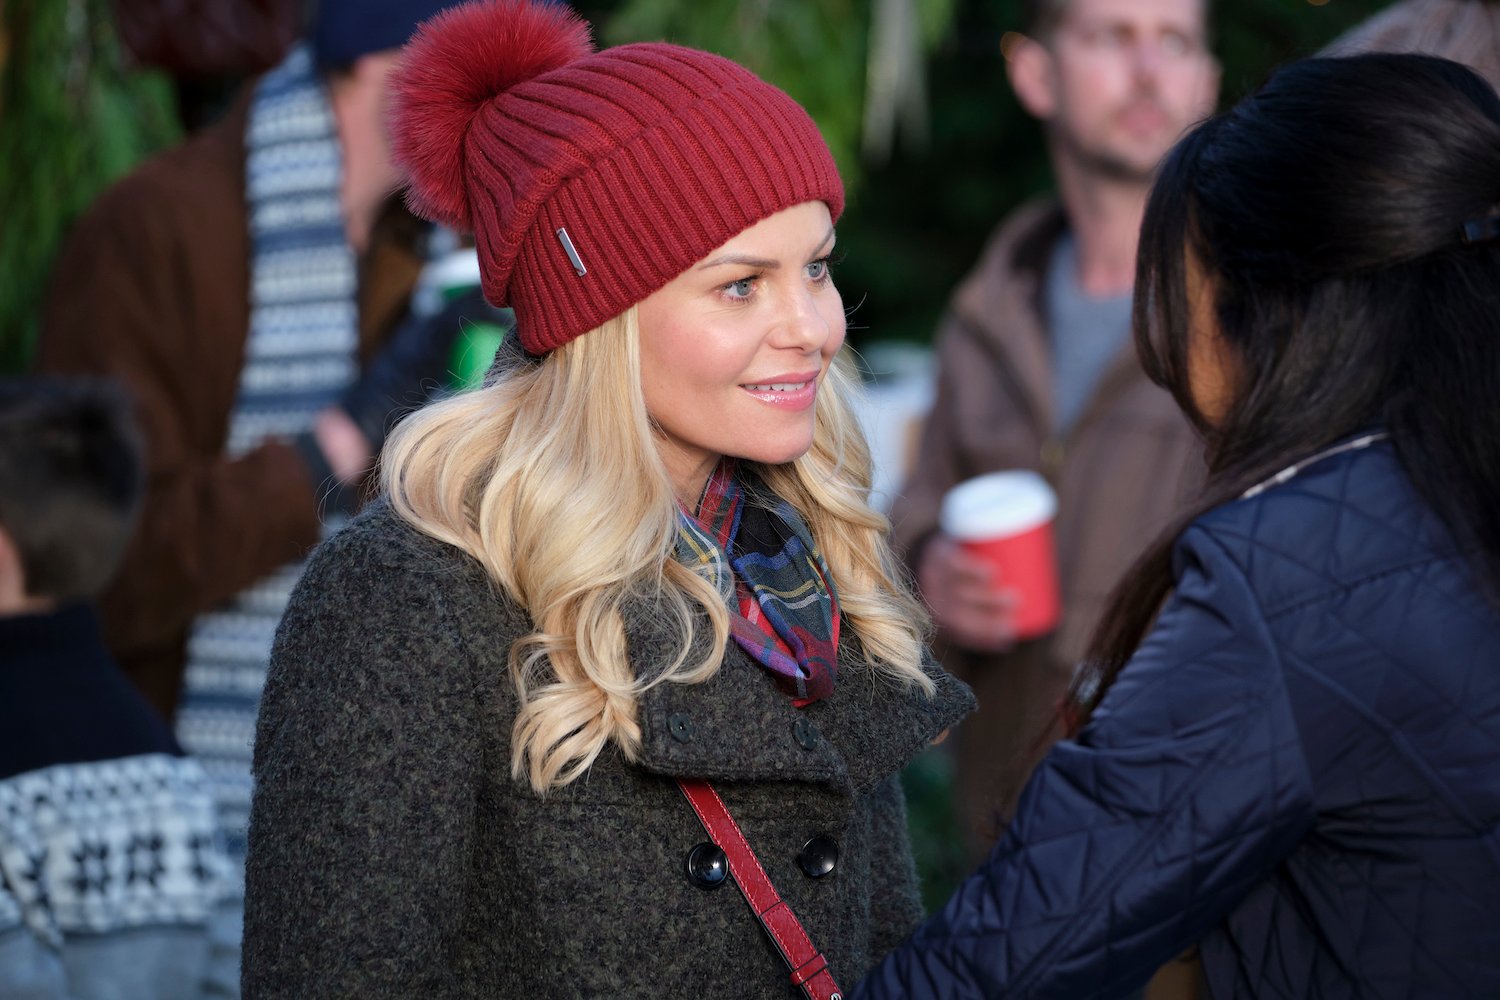 Candace Cameron Bure wearing a red knit hat in 'If I Only Had Christmas'